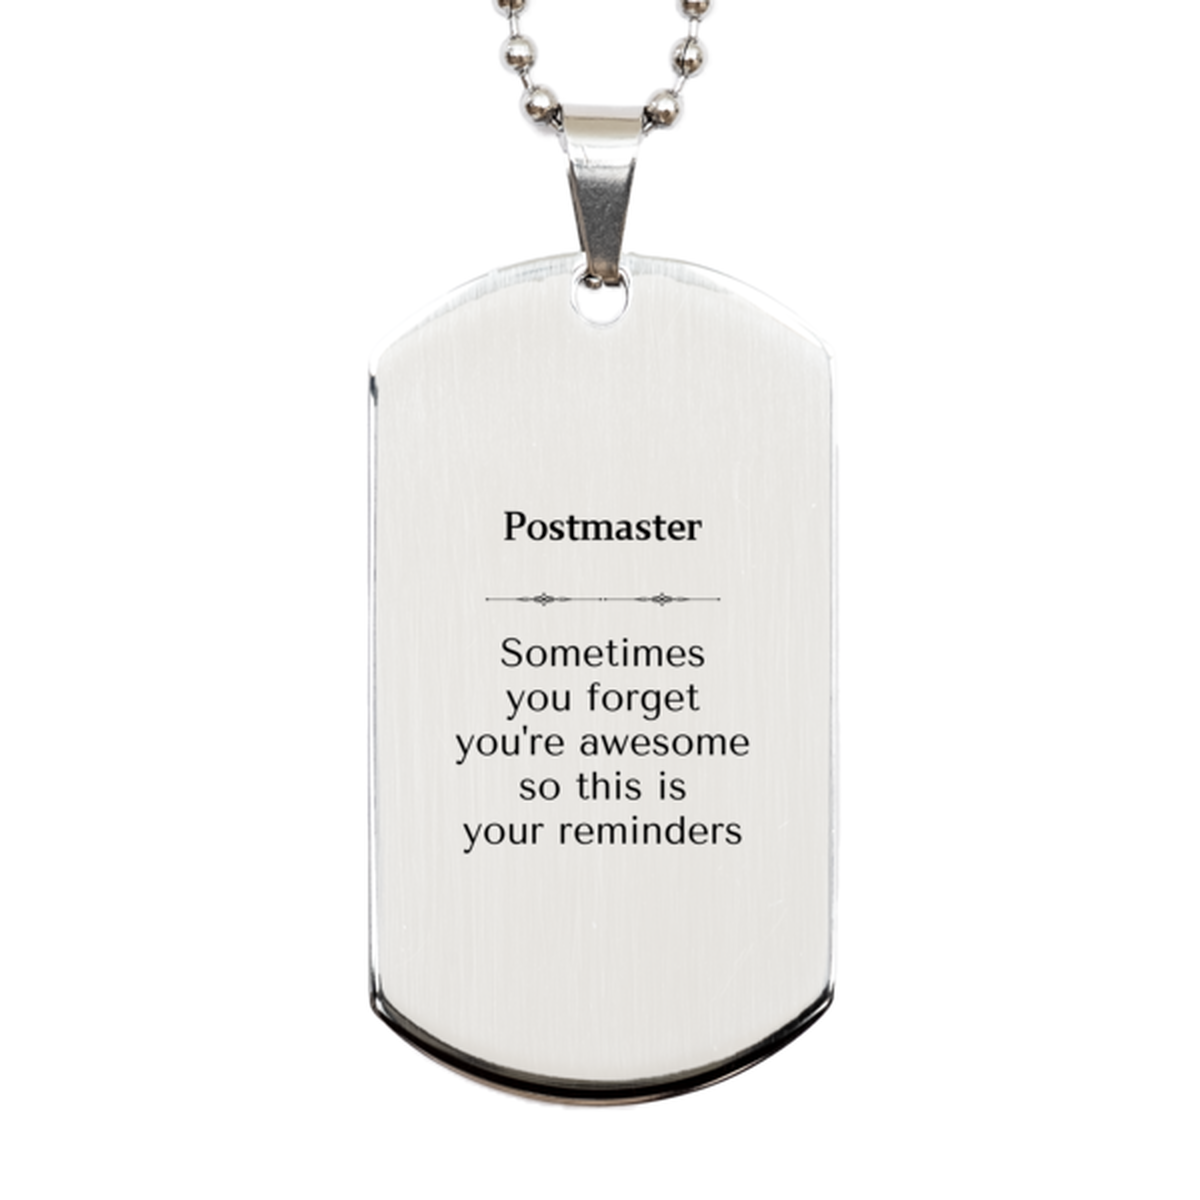 Sentimental Postmaster Silver Dog Tag, Postmaster Sometimes you forget you're awesome so this is your reminders, Graduation Christmas Birthday Gifts for Postmaster, Men, Women, Coworkers